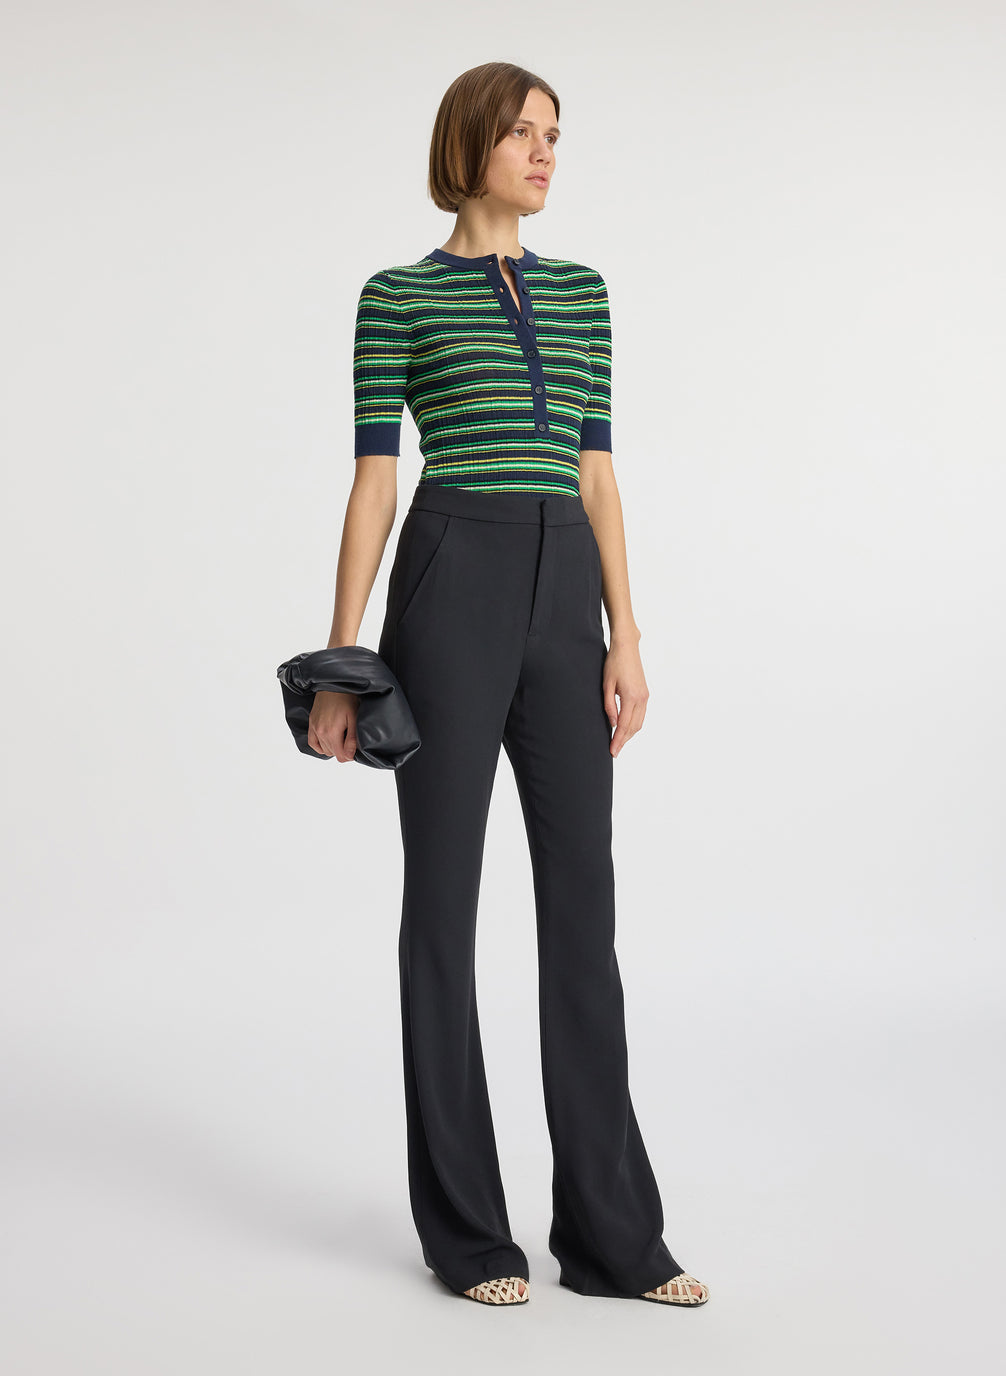 side view of woman wearing navy blue and green striped half sleeve button placket shirt and black pant